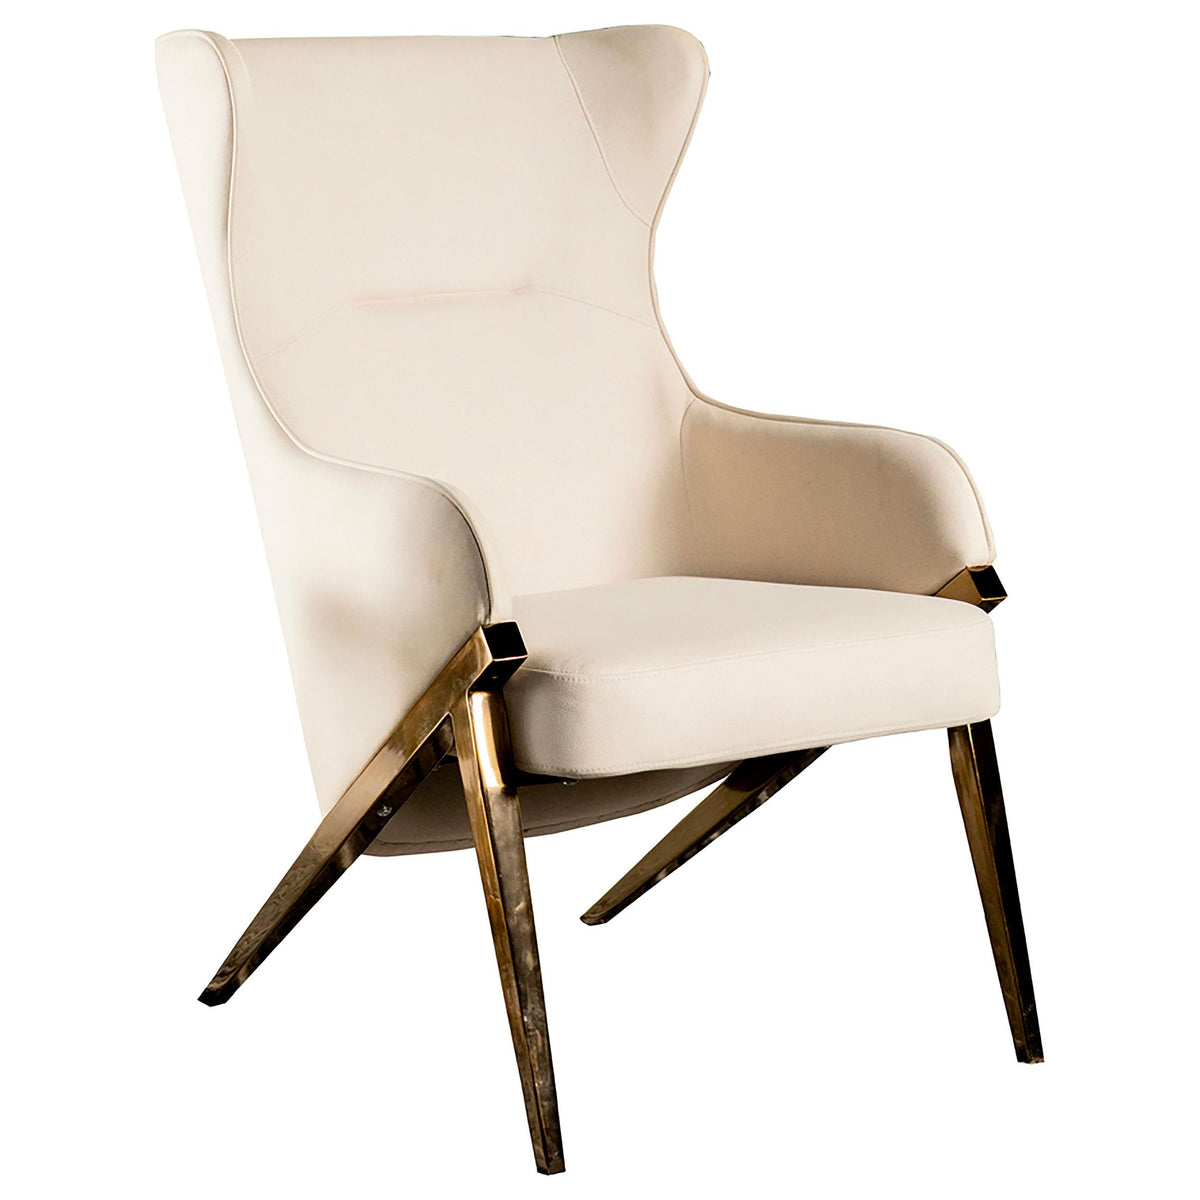 Walker Upholstered Accent Chair Cream and Bronze  Las Vegas Furniture Stores